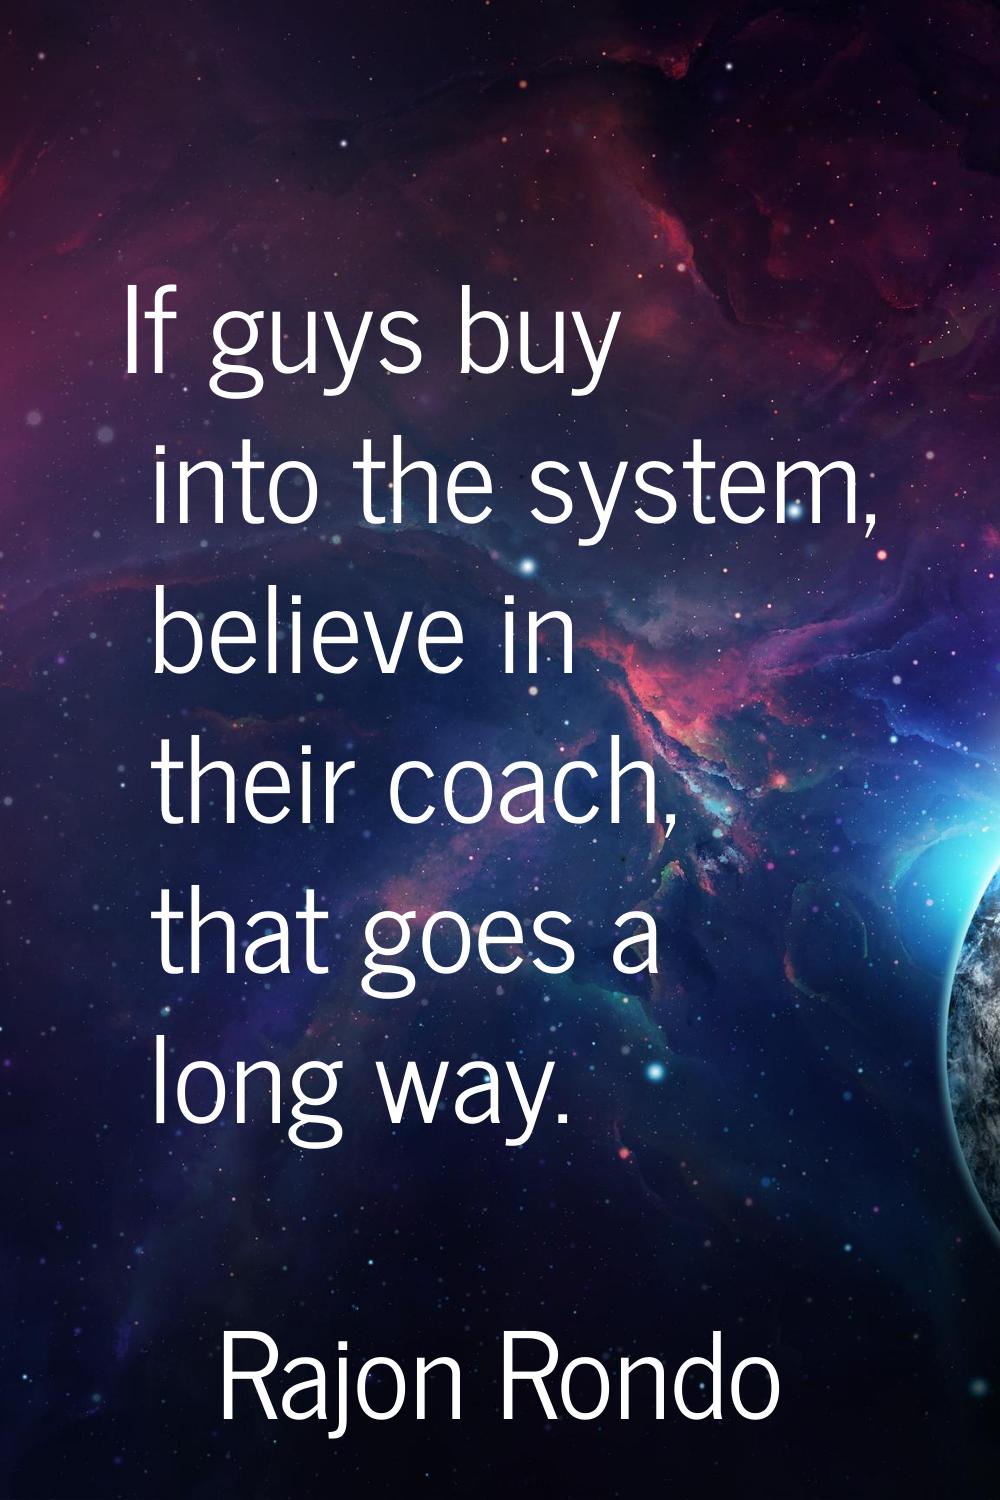 If guys buy into the system, believe in their coach, that goes a long way.